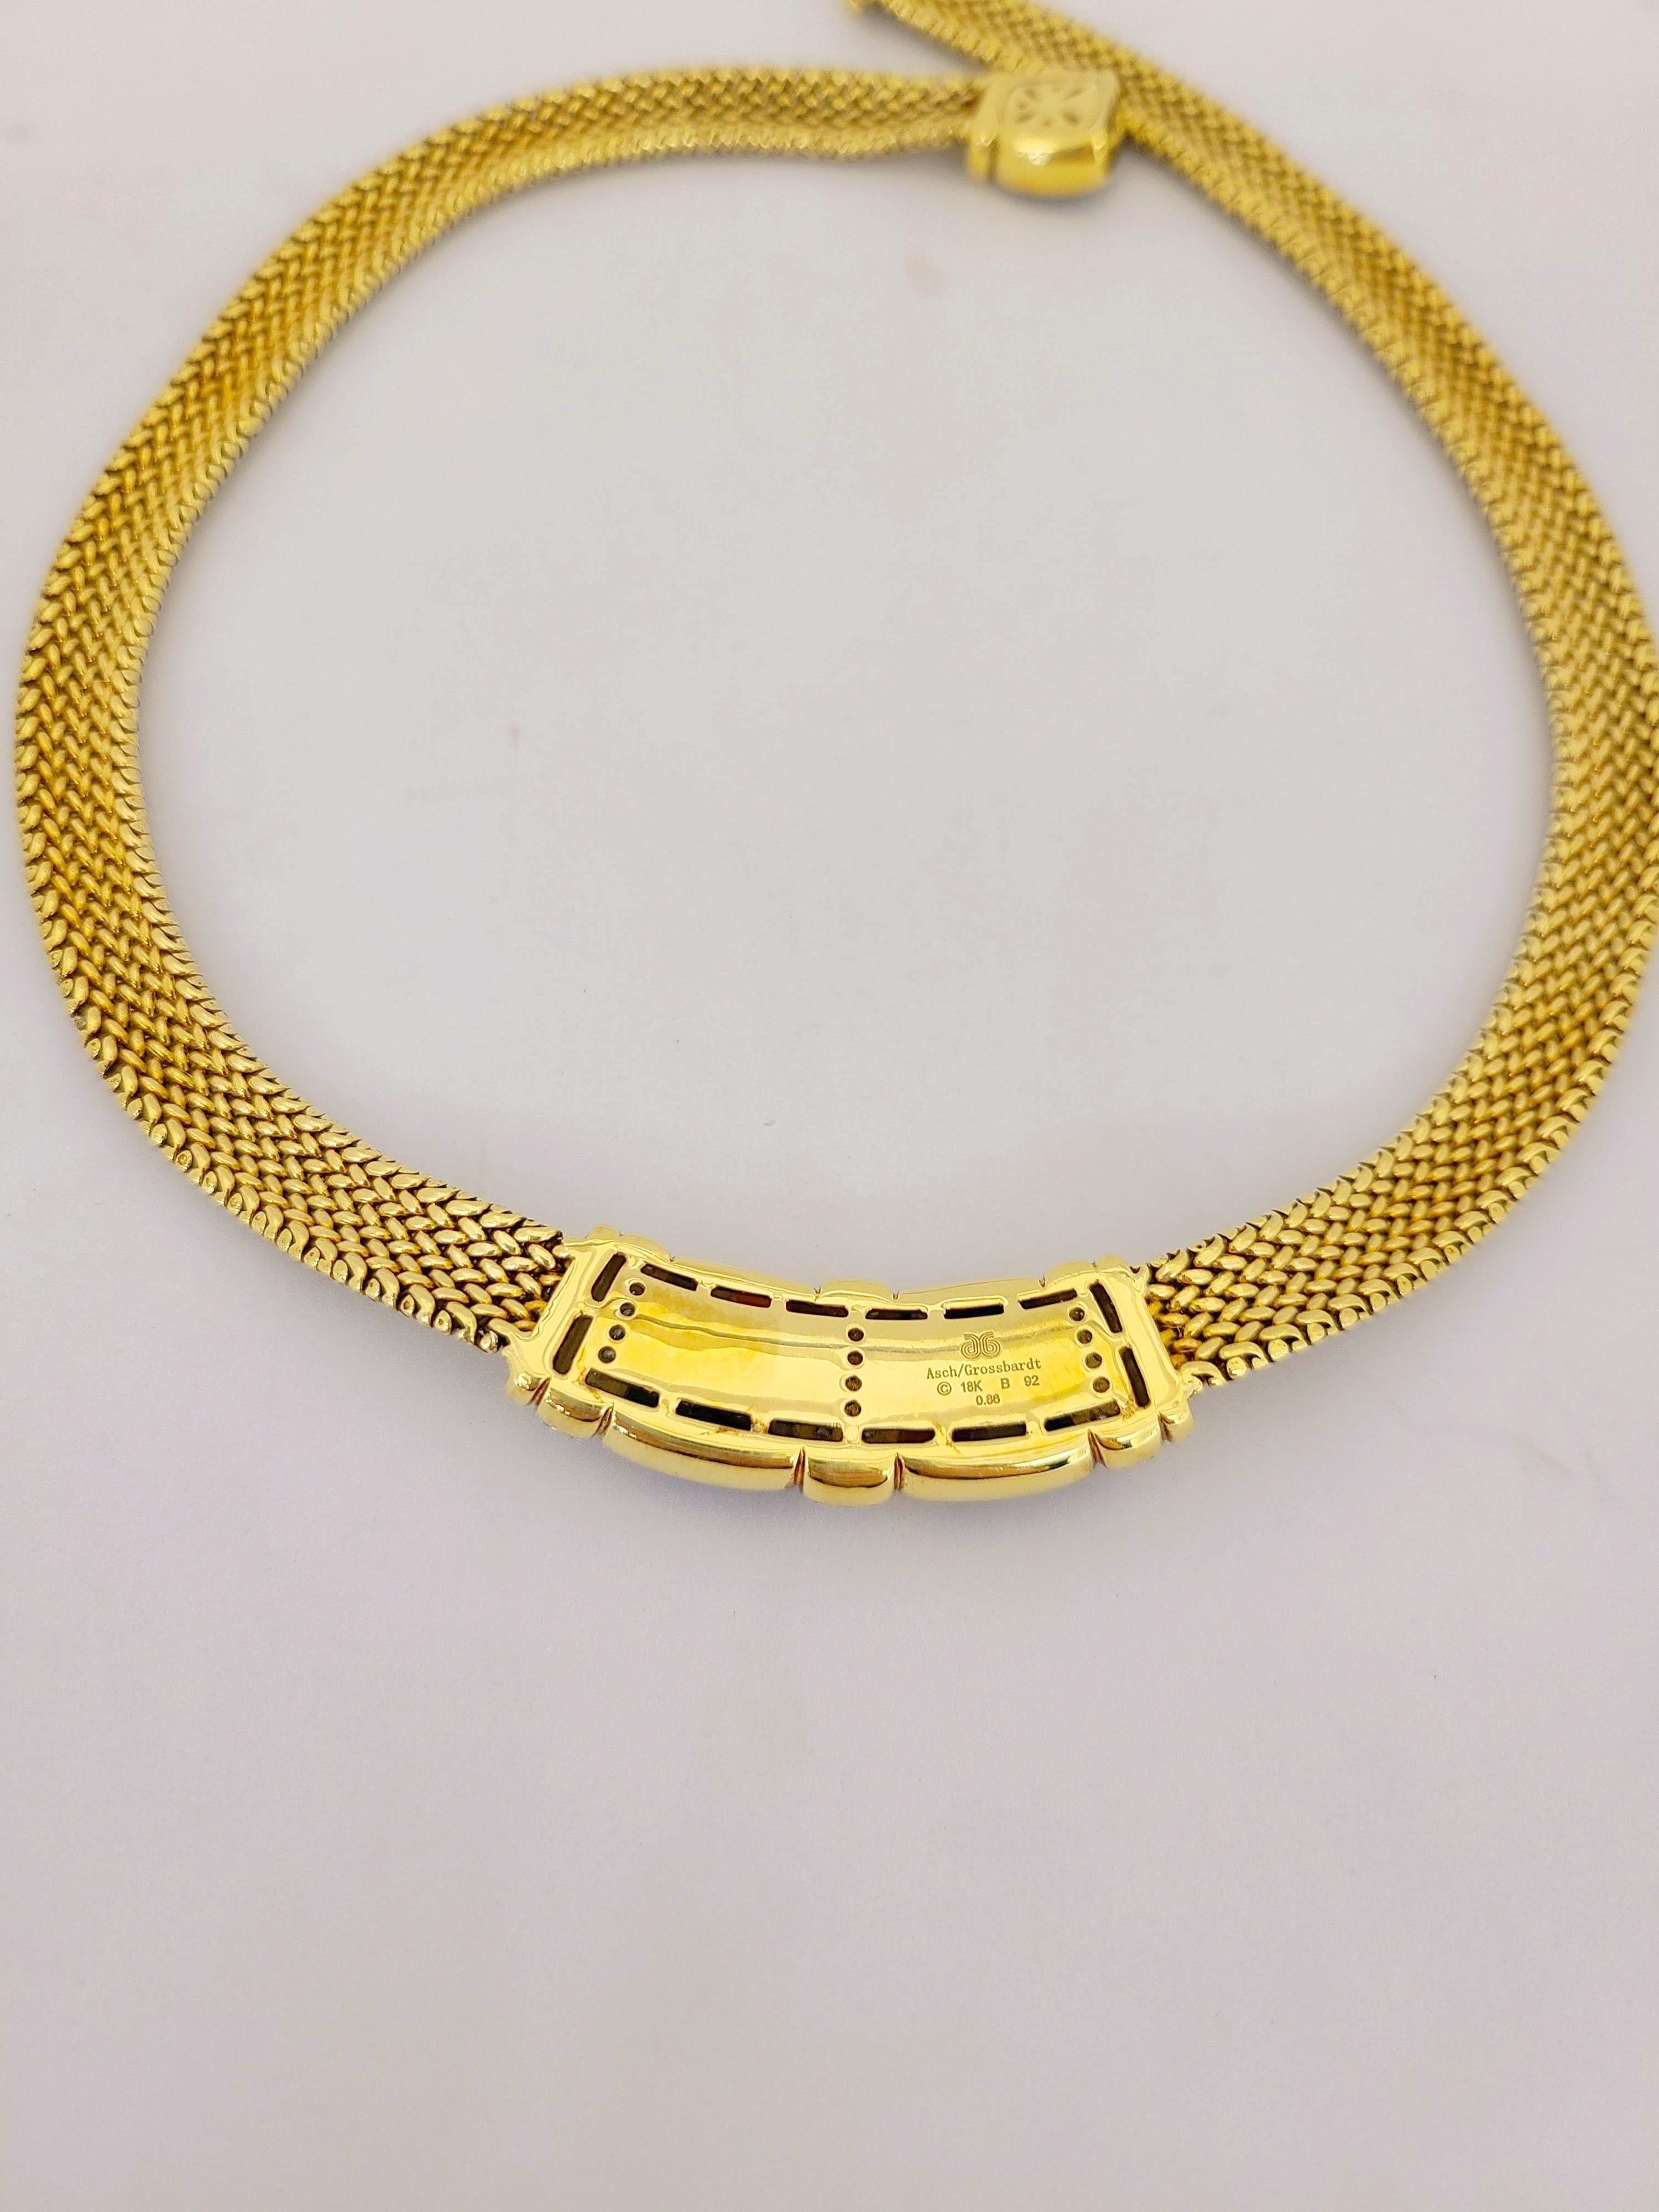 Women's or Men's Asch Grosbardt 18 Karat Yellow Gold Necklace with Diamonds and Inlaid Stones For Sale